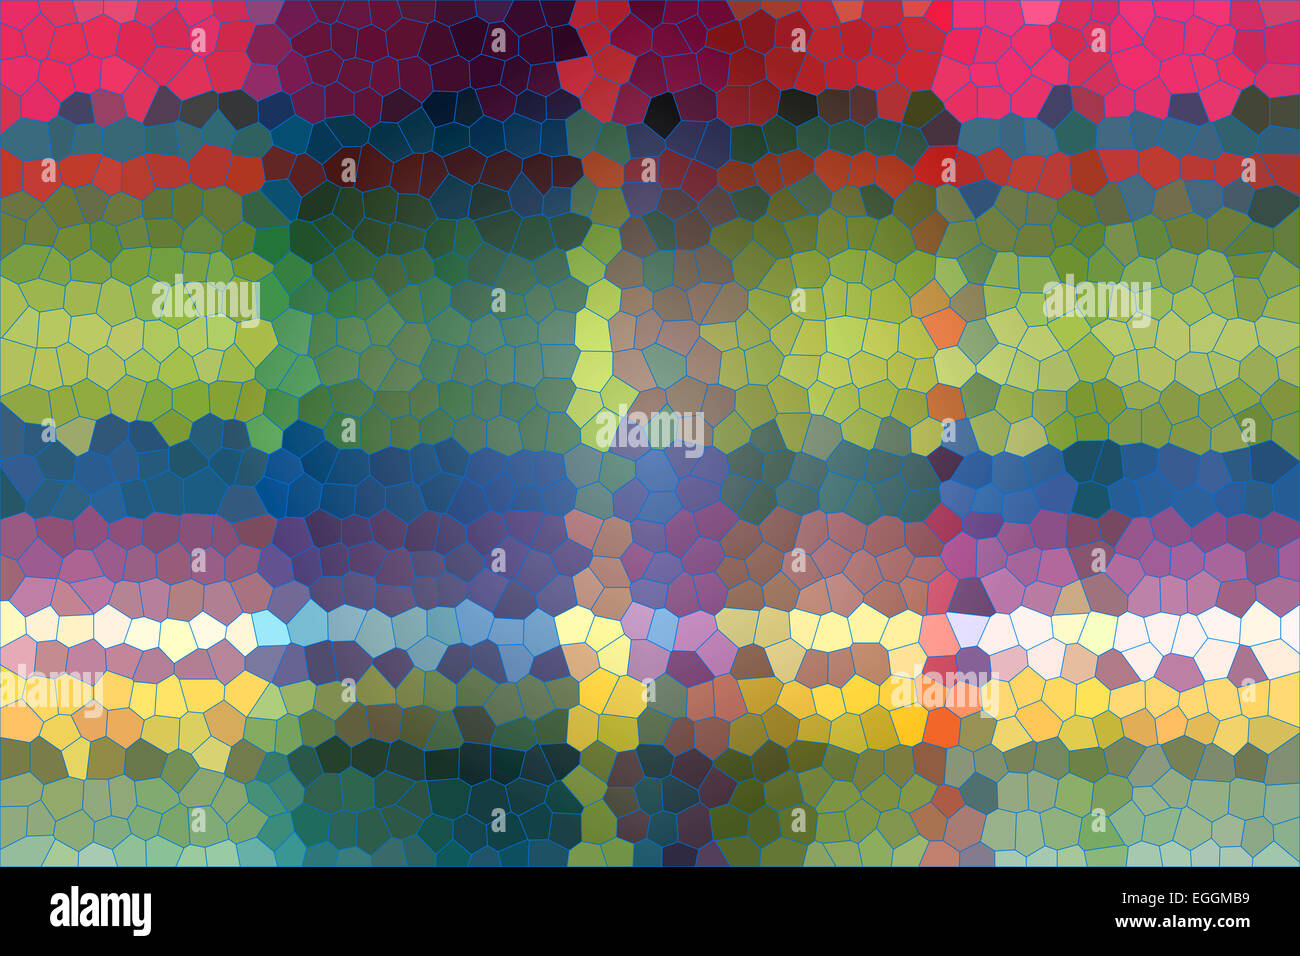 Abstract colorful background patterns. Stock Photo